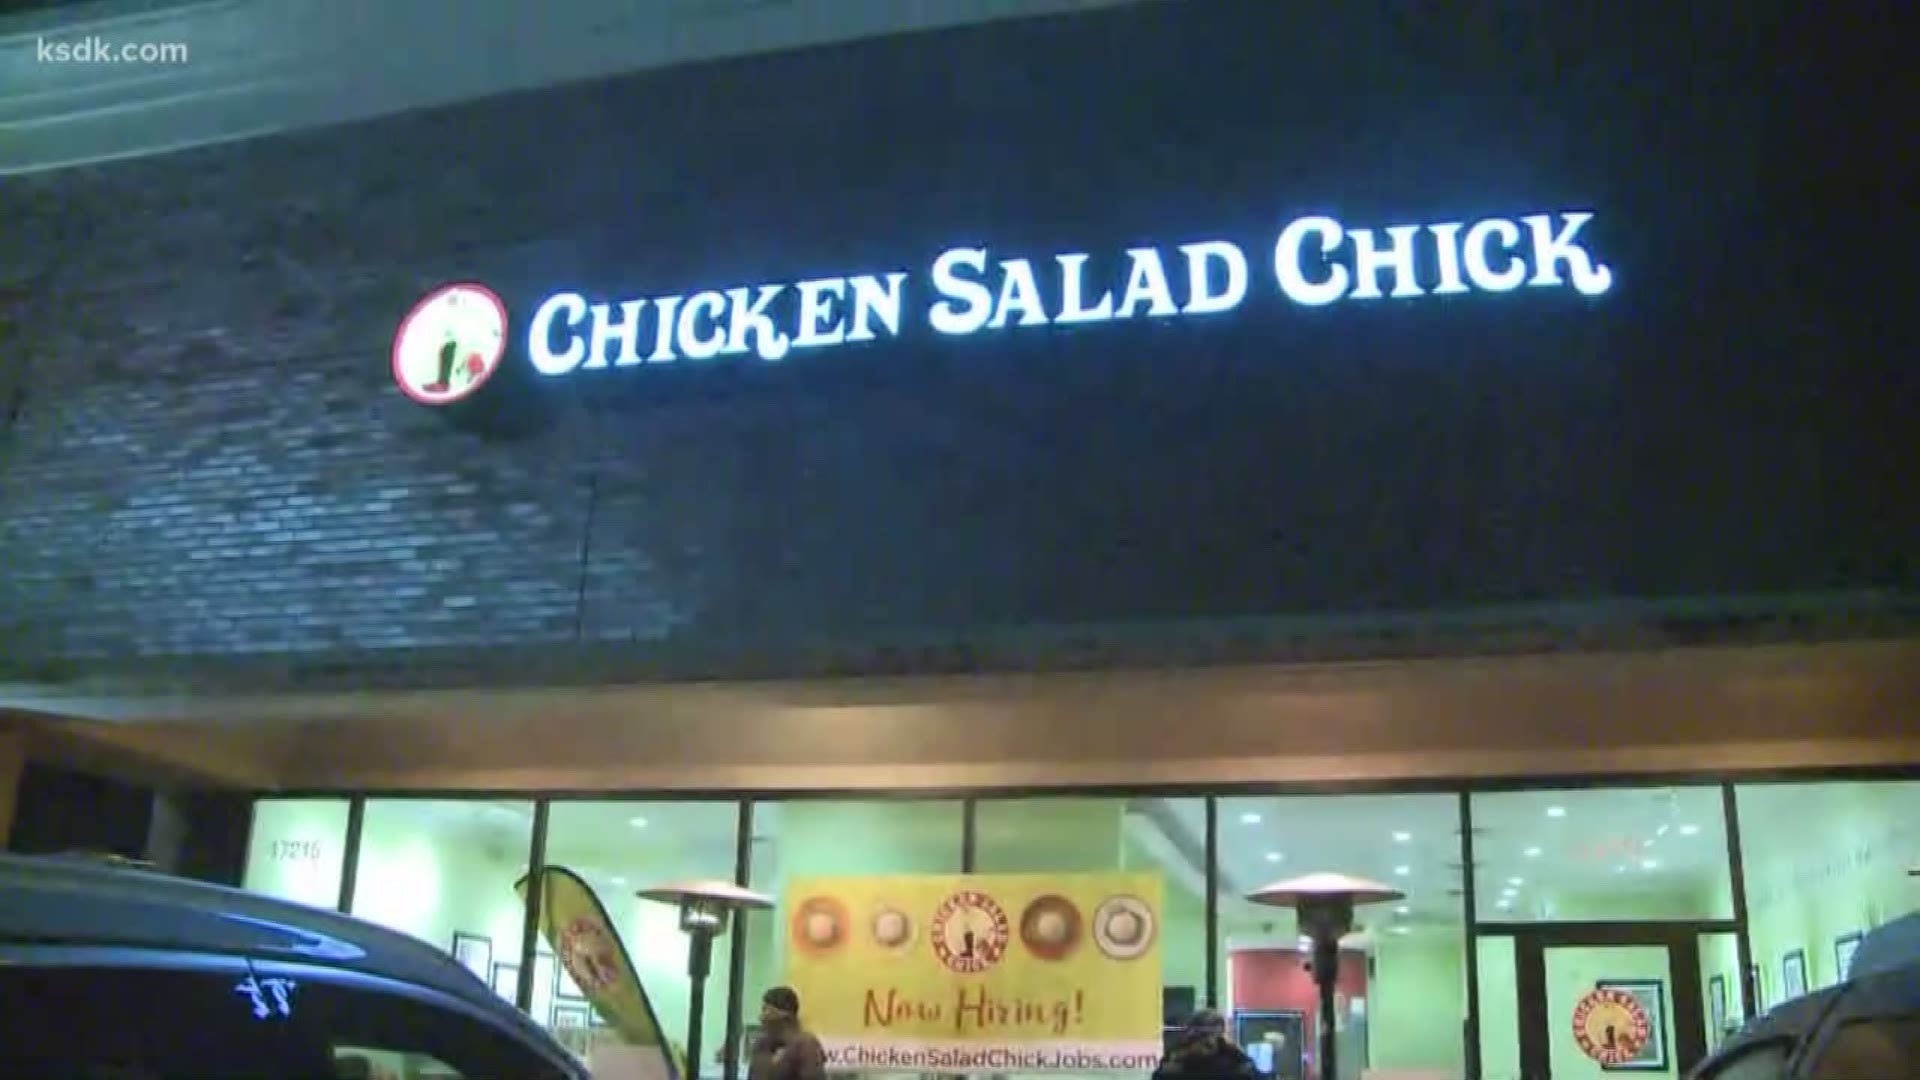 Chicken Salad Chick opens its first Missouri location in Chesterfield. People lined up in the cold weather for a chance to get free food for a year.